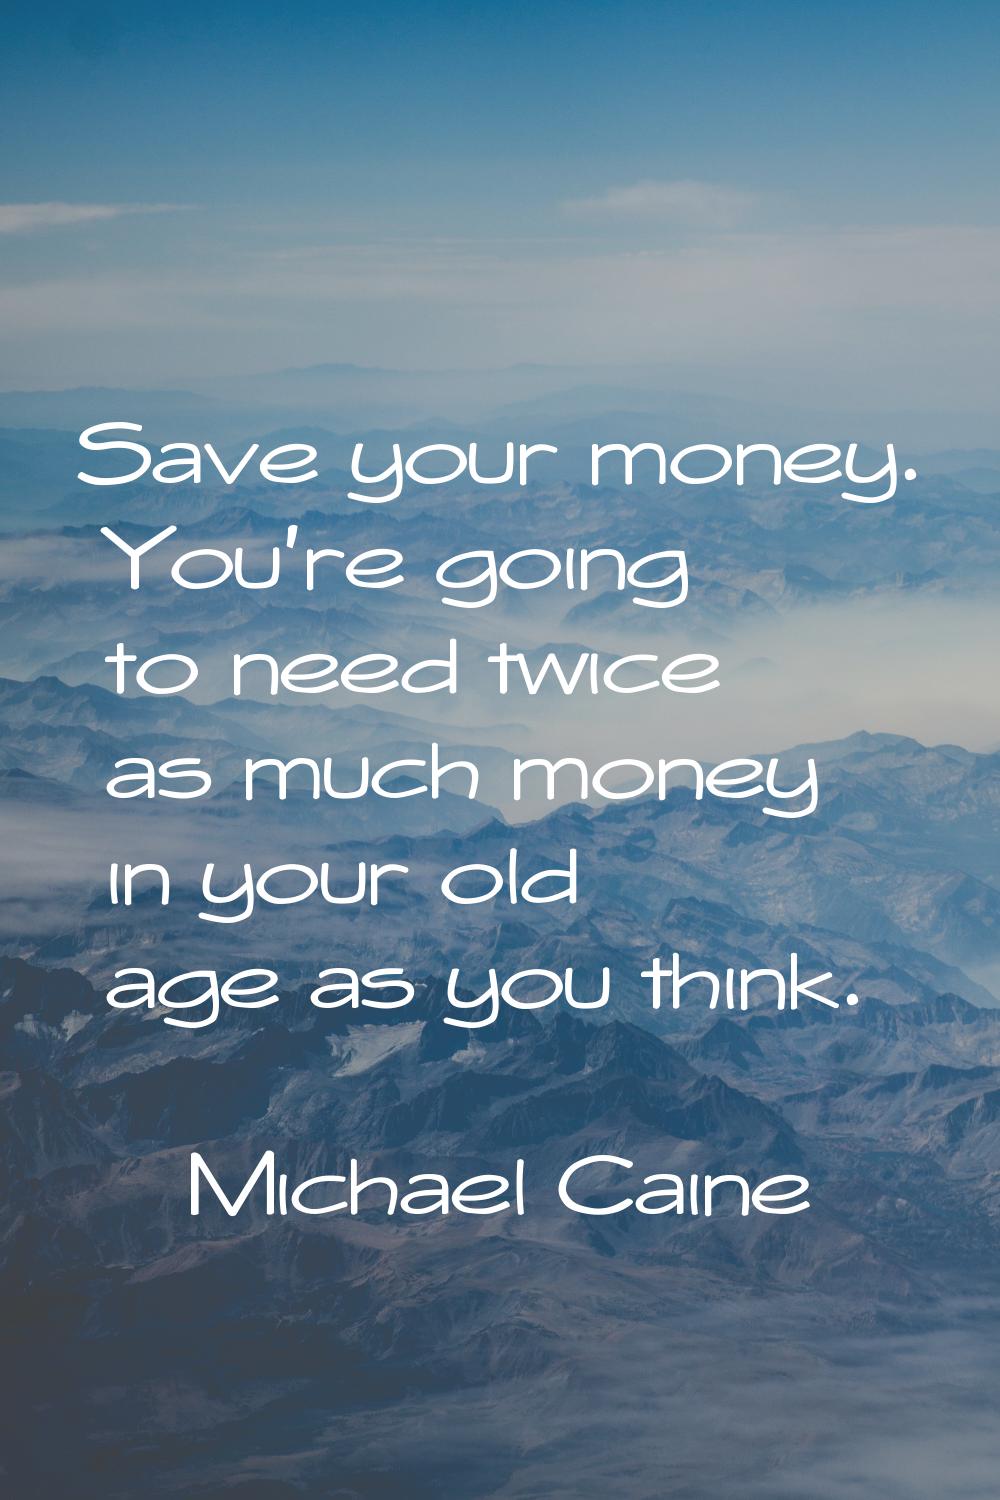 Save your money. You're going to need twice as much money in your old age as you think.